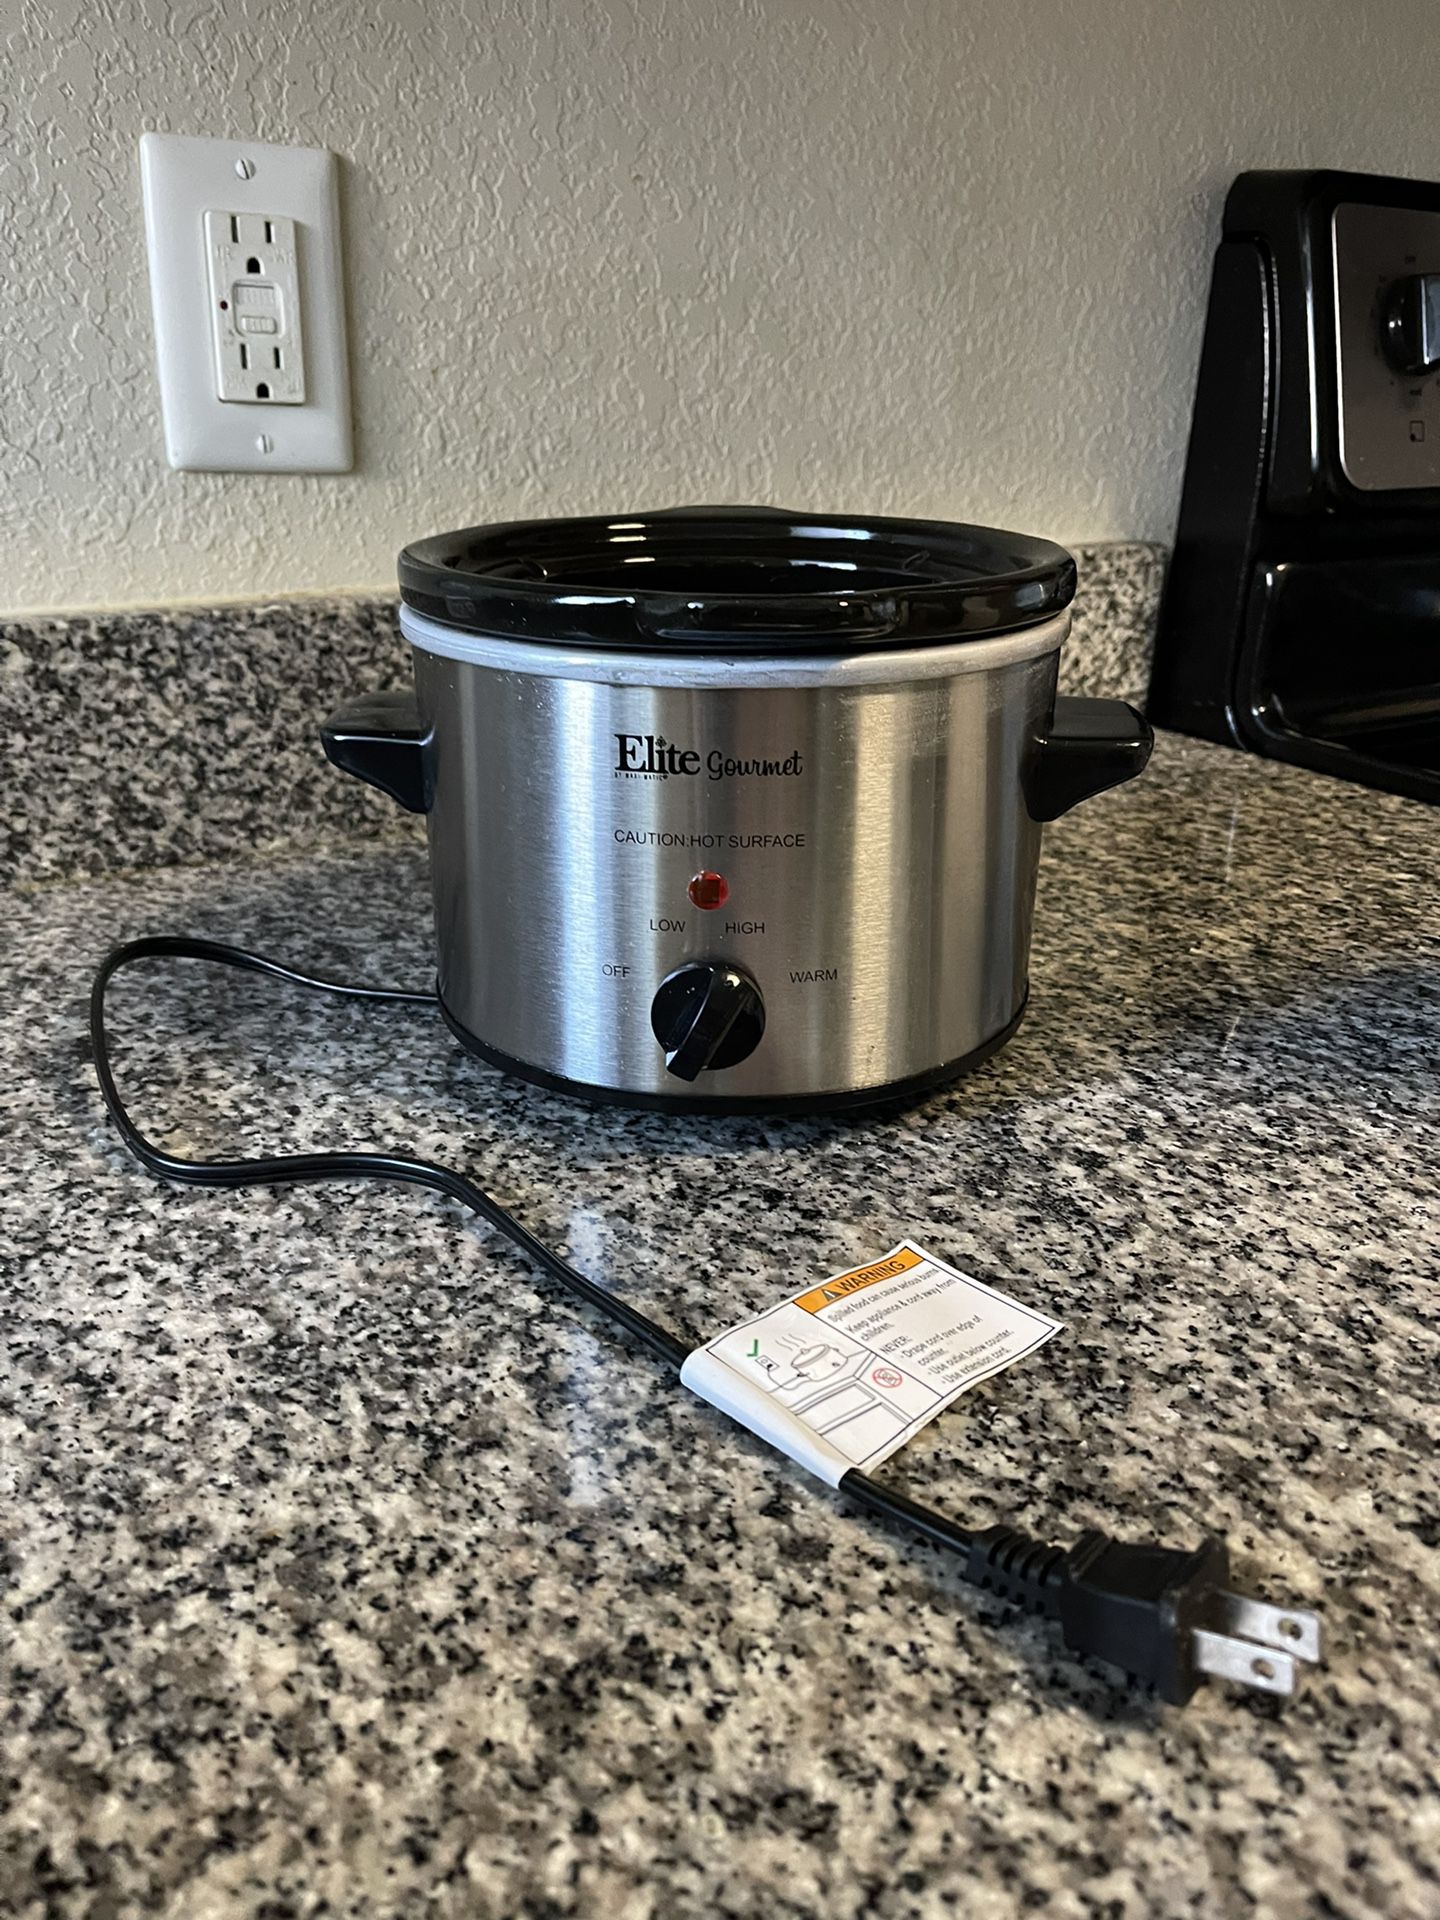 Elite Gourmet Rice Cooker for Sale in Tallahassee, FL - OfferUp